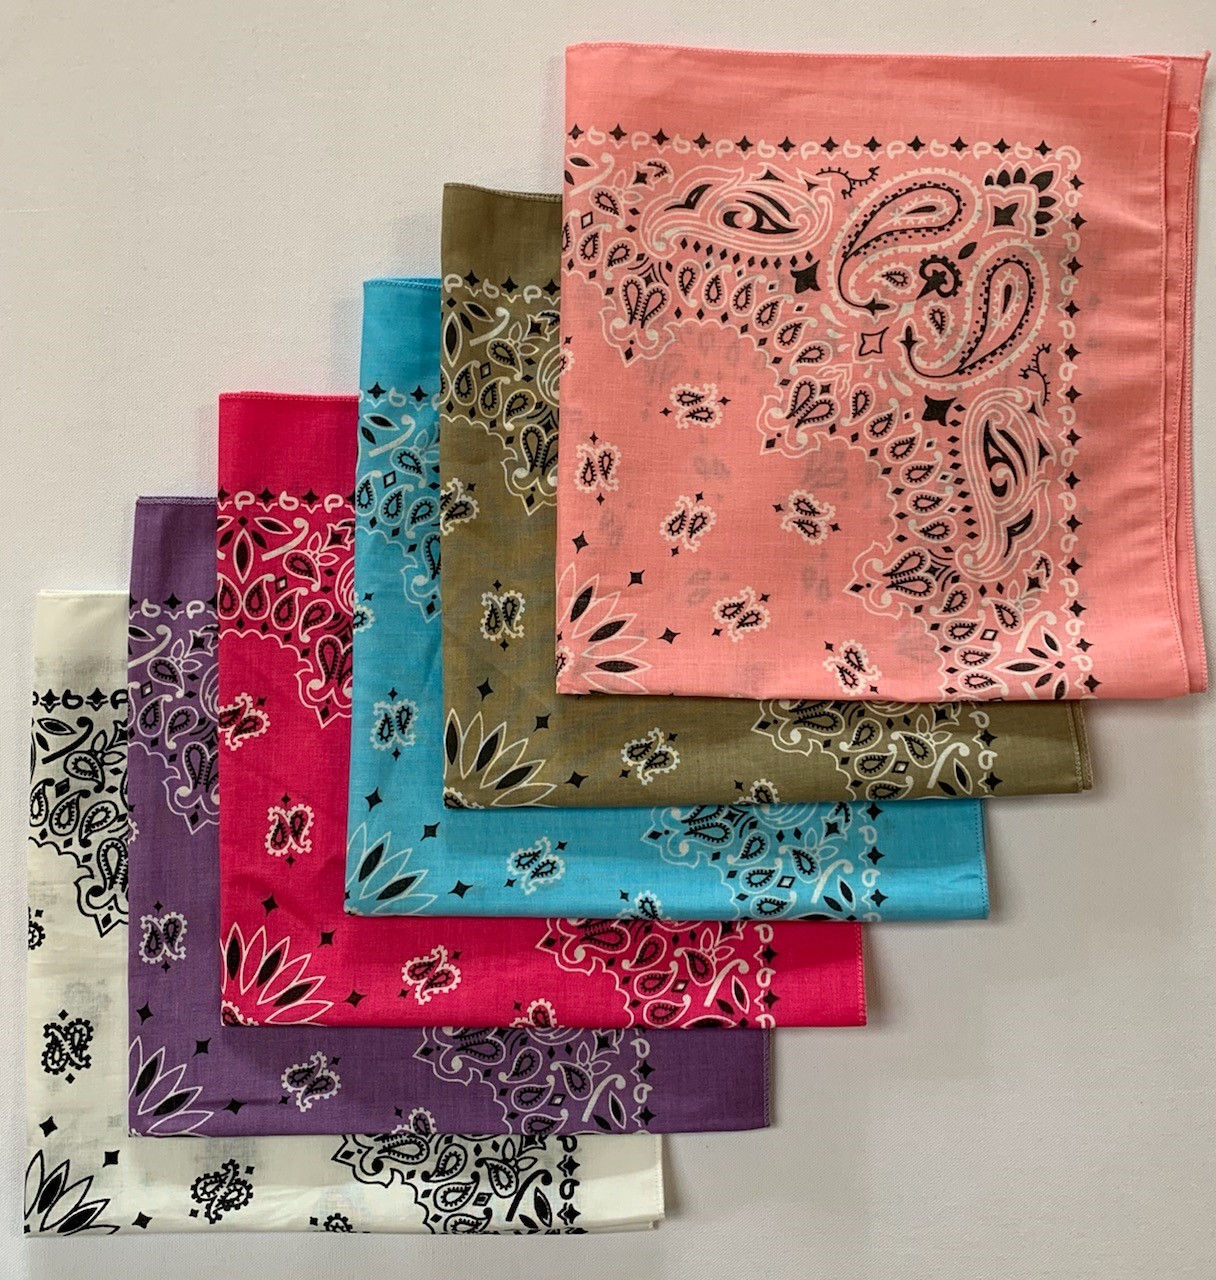 Paisley Bandanas USA Made 22" x 22" - 6 Pack Assorted As Shown